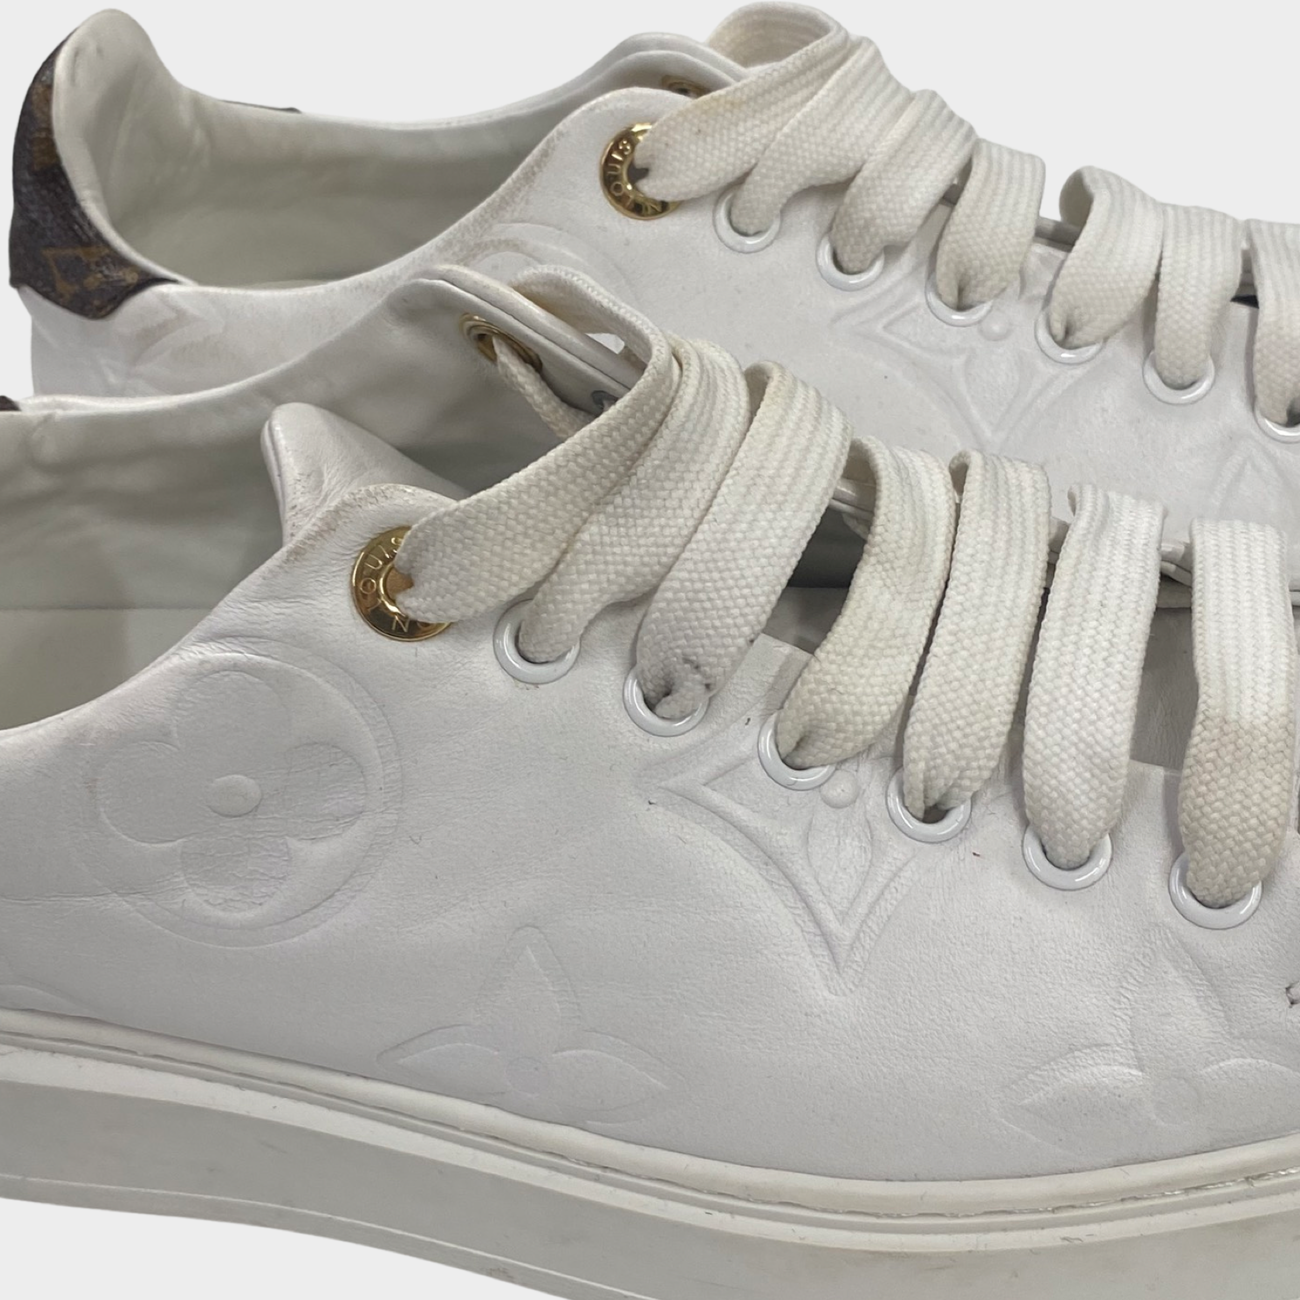 Louis Vuitton - Authenticated Time Out Trainer - Leather White Plain for Women, Very Good Condition